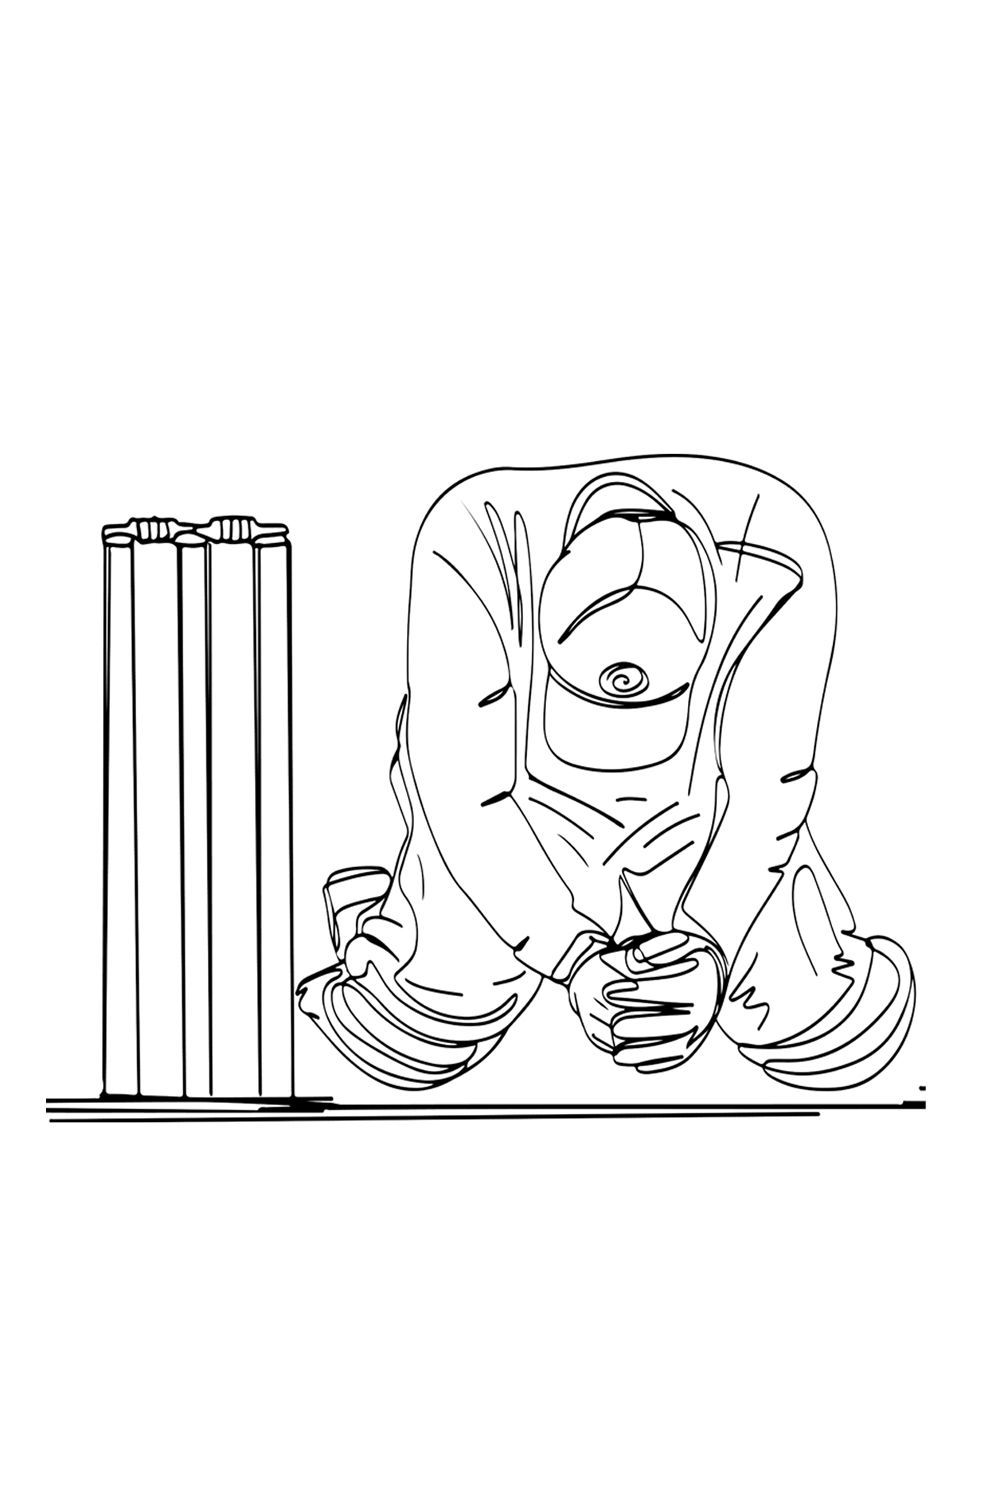 Free cricket player illustrations | Download free stock images | FreeImages